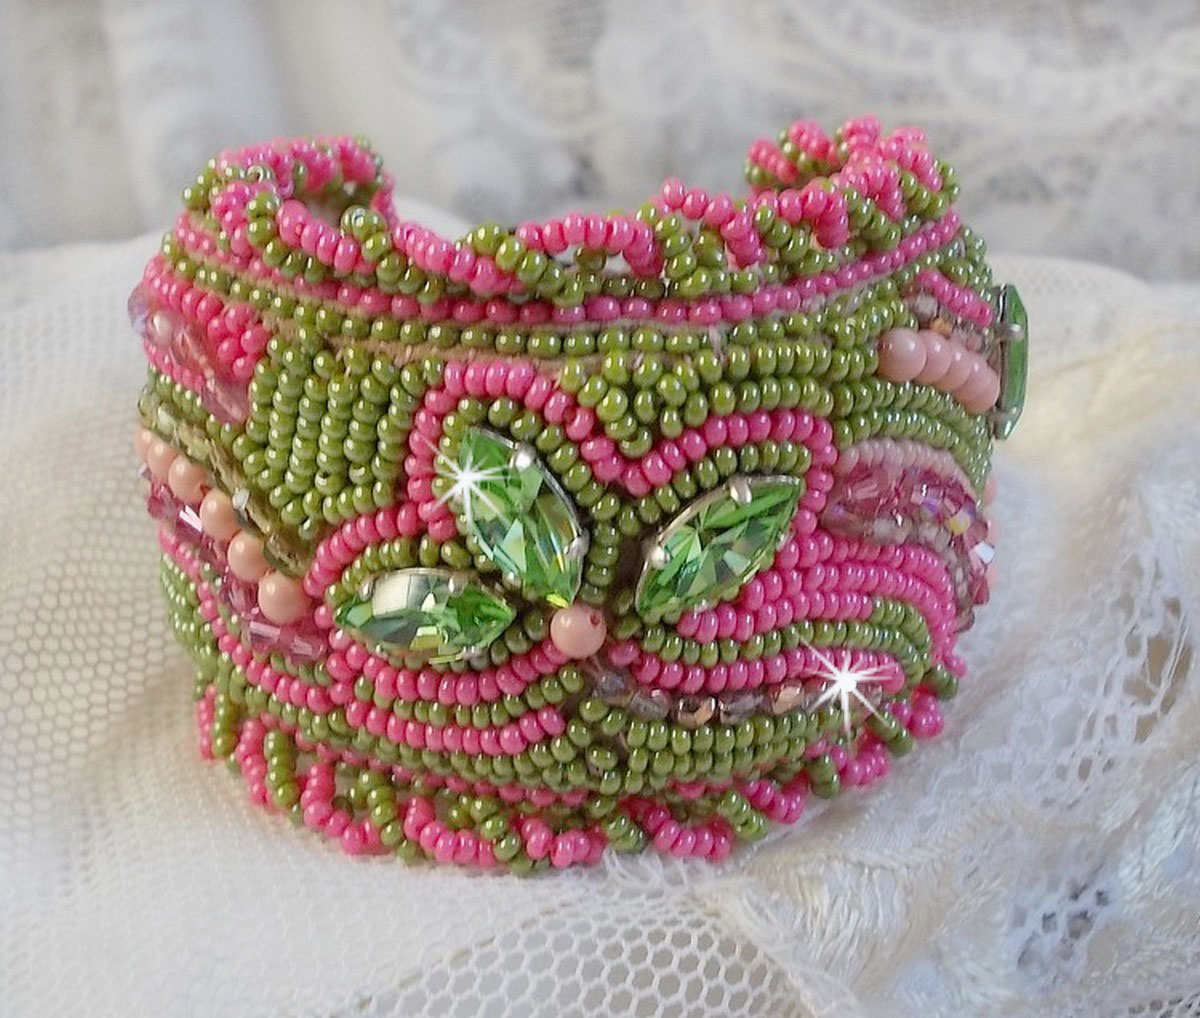 Miss Lady cuff bracelet embroidered with Swarovski crystals, faceted Bohemian glass and green and pink seed beads